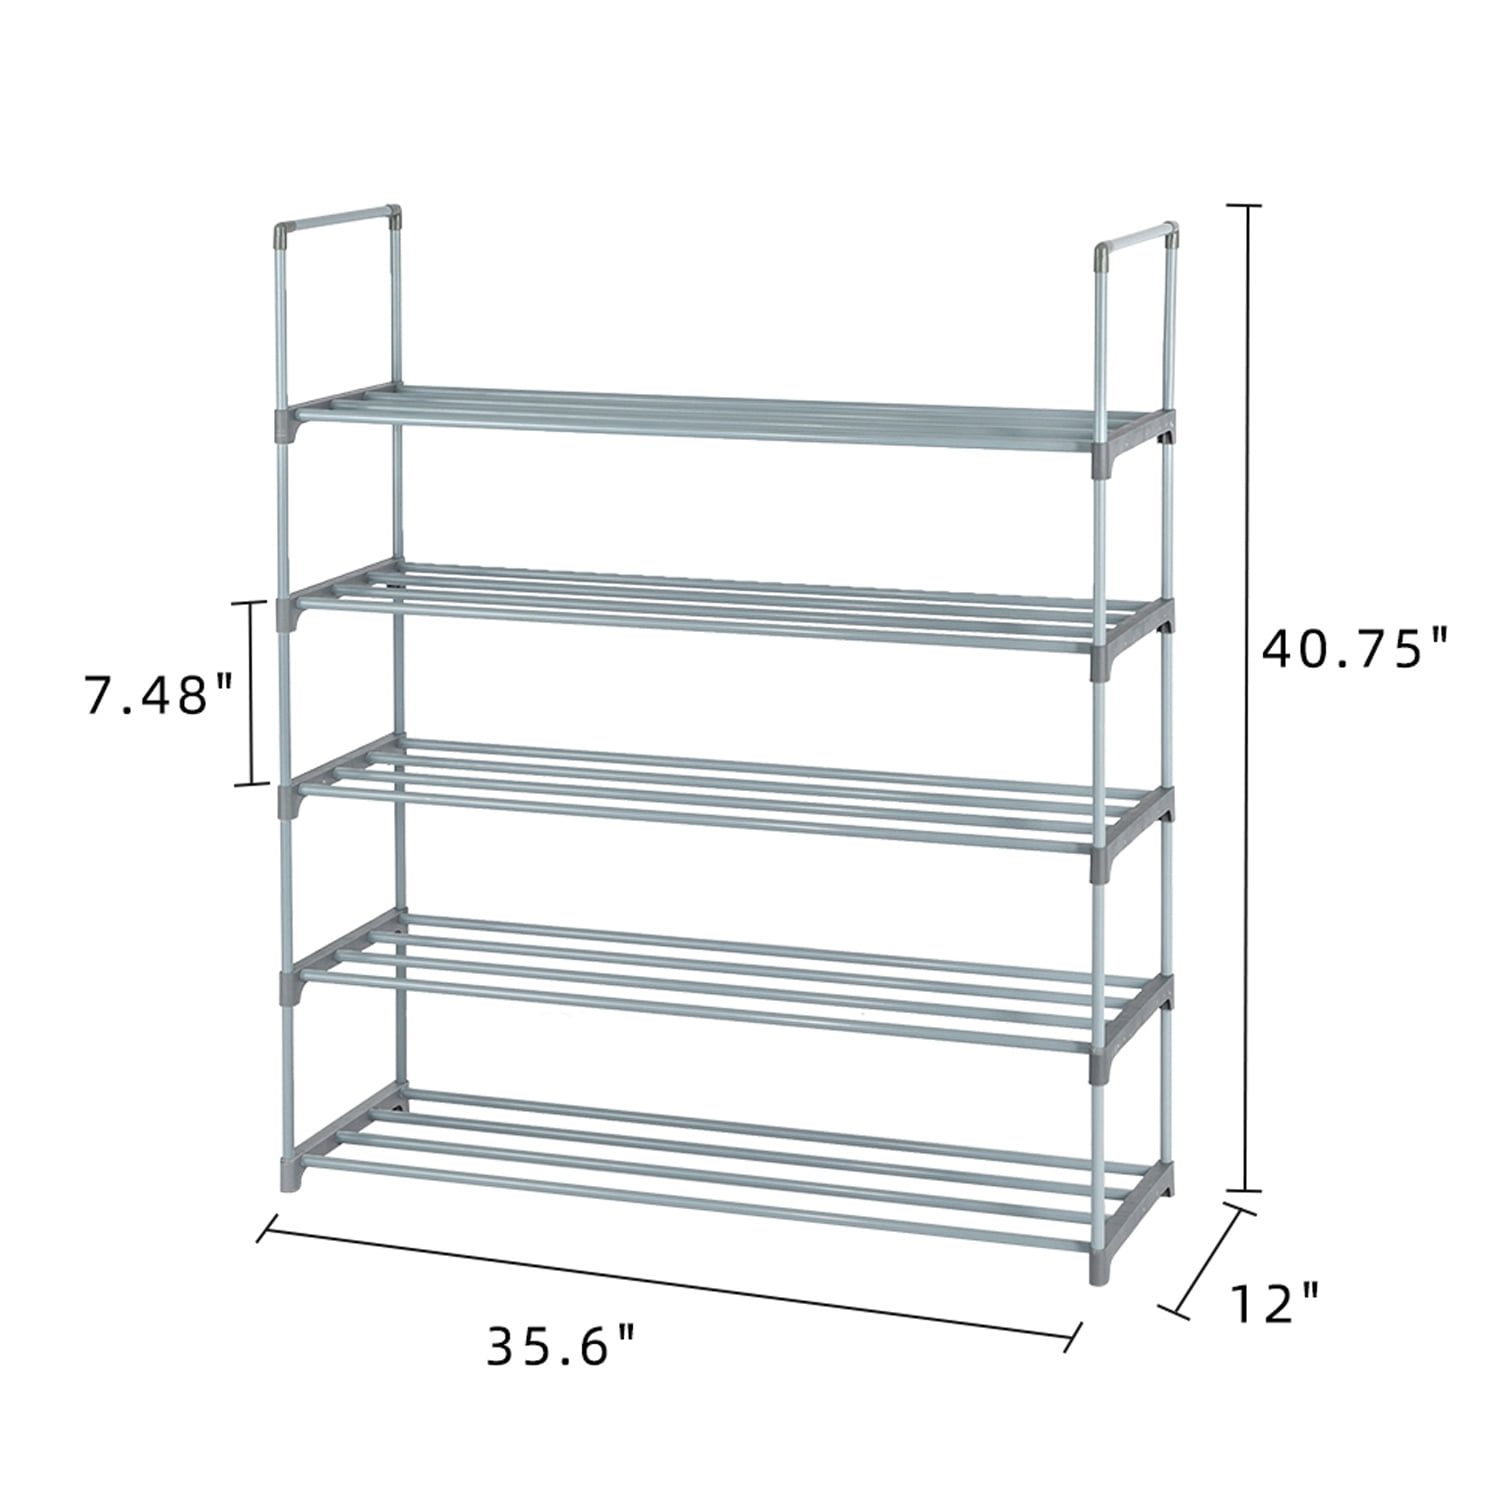 Apicizon 5-Tier Metal Shoe Rack for Up to 25 Pairs Shoe Organizer with Angle from Slant to Flat, Stackable Shoe Storage Shelves with Stable Iron